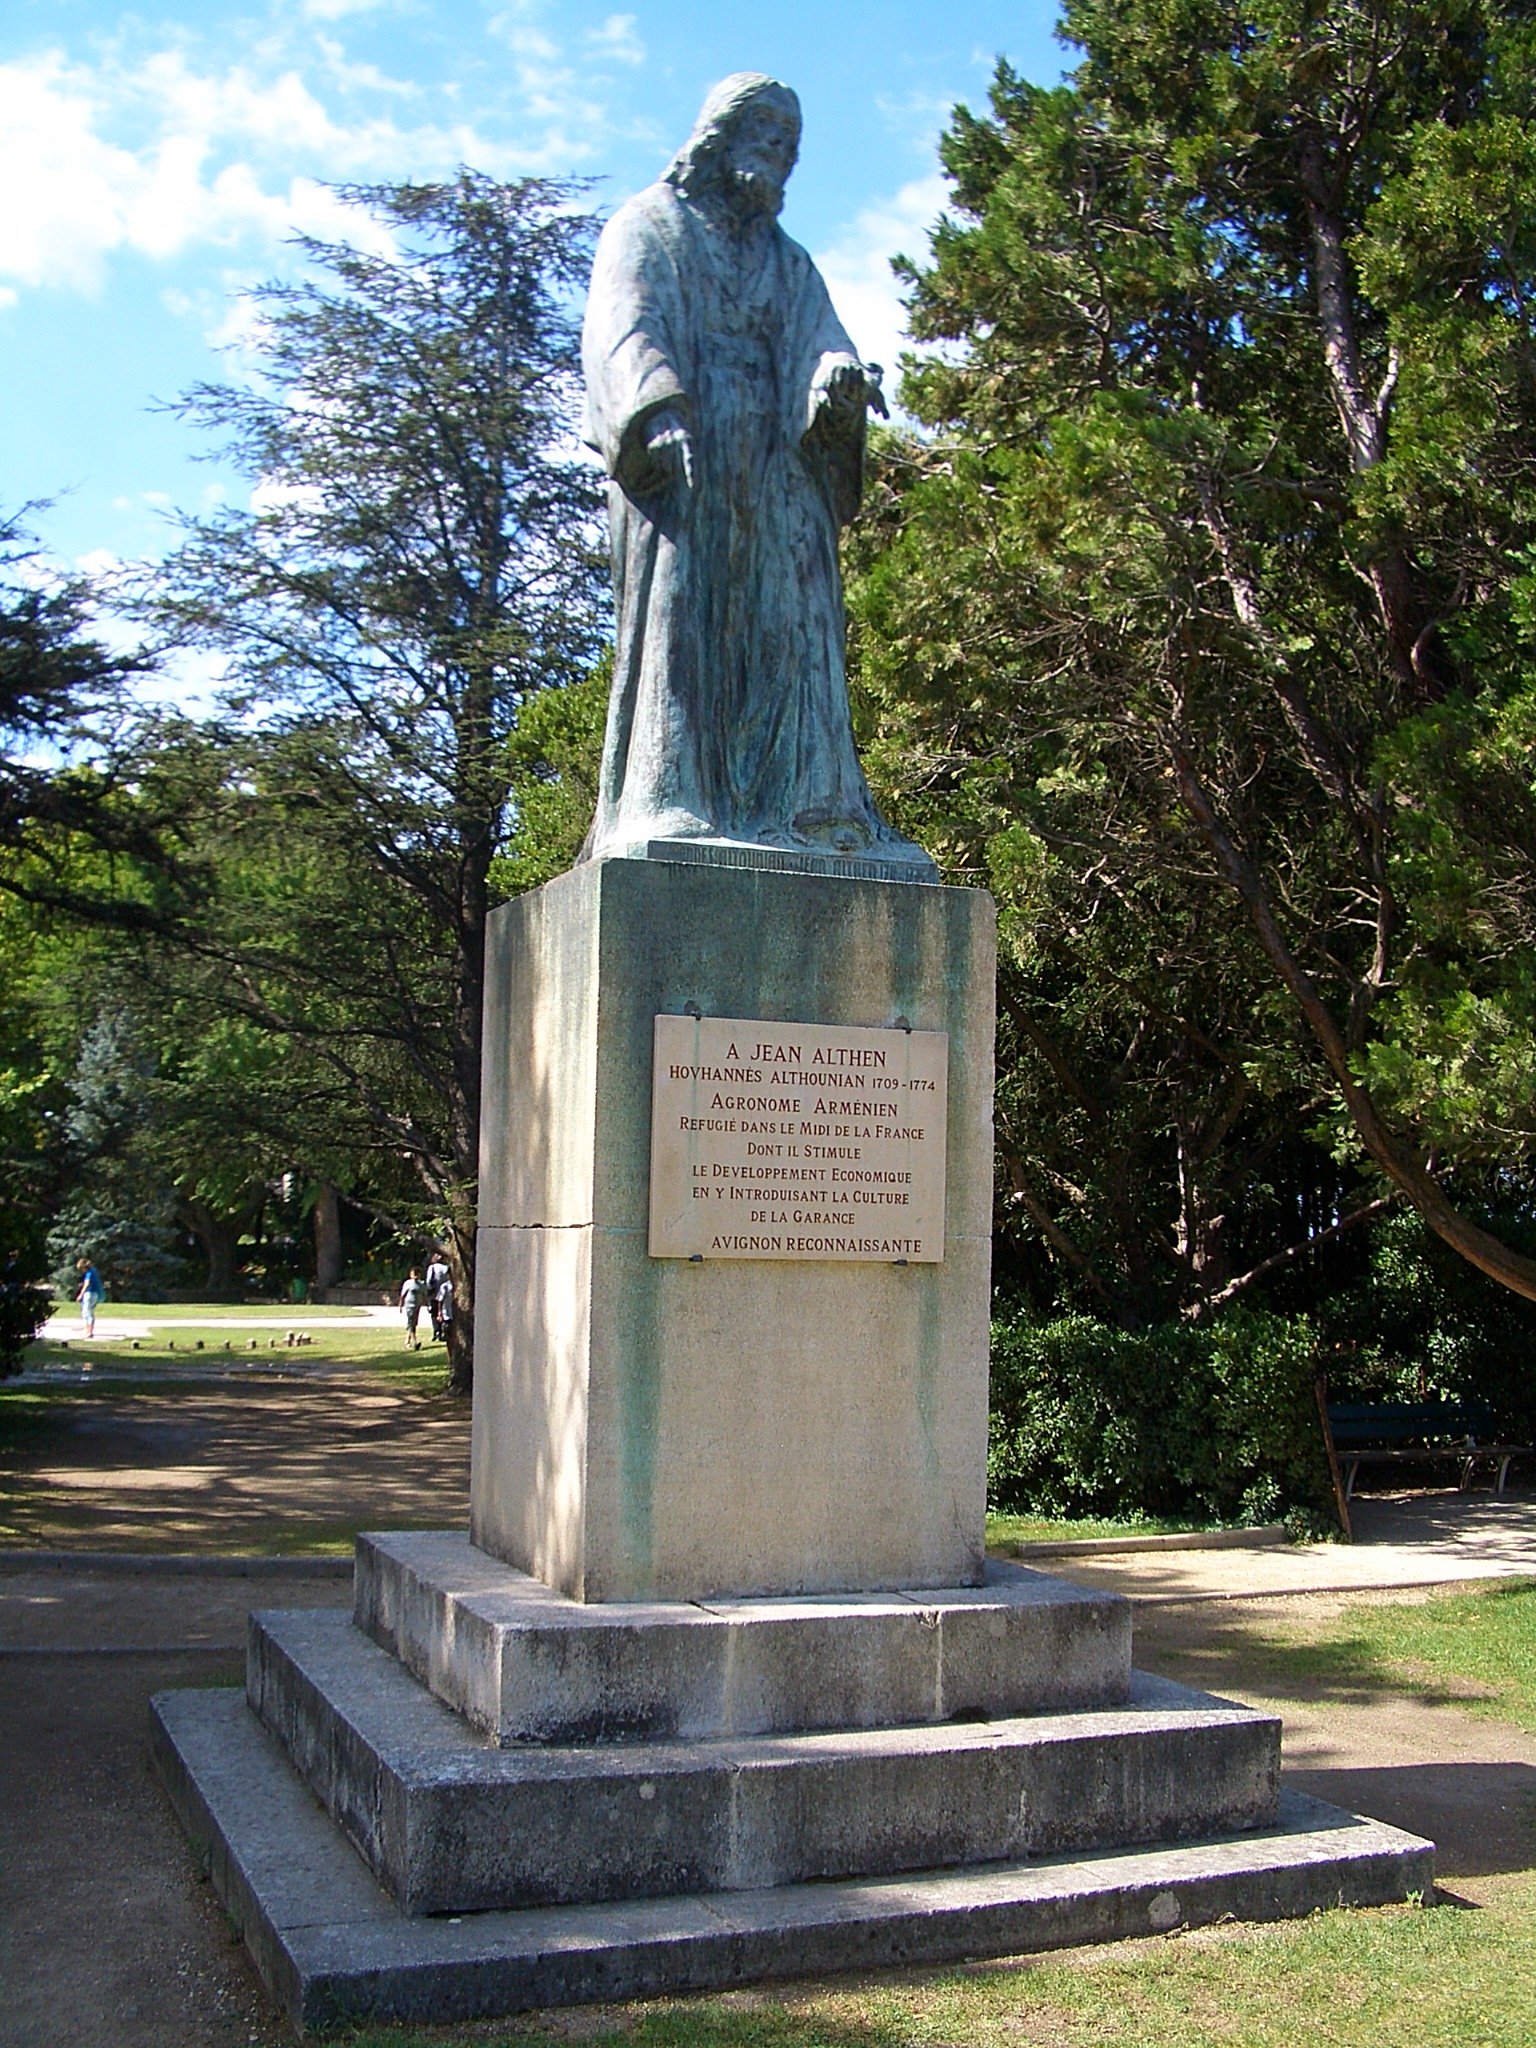 A statute in Avignon, a monument to Jean Althen – Hovhannes Althounian (1709-1774) – an Armenian agronomist who introduced a new dyeing technique, thereby boosting the economy in the south of France in the 18th century; a commune (district) of the country is named after him.